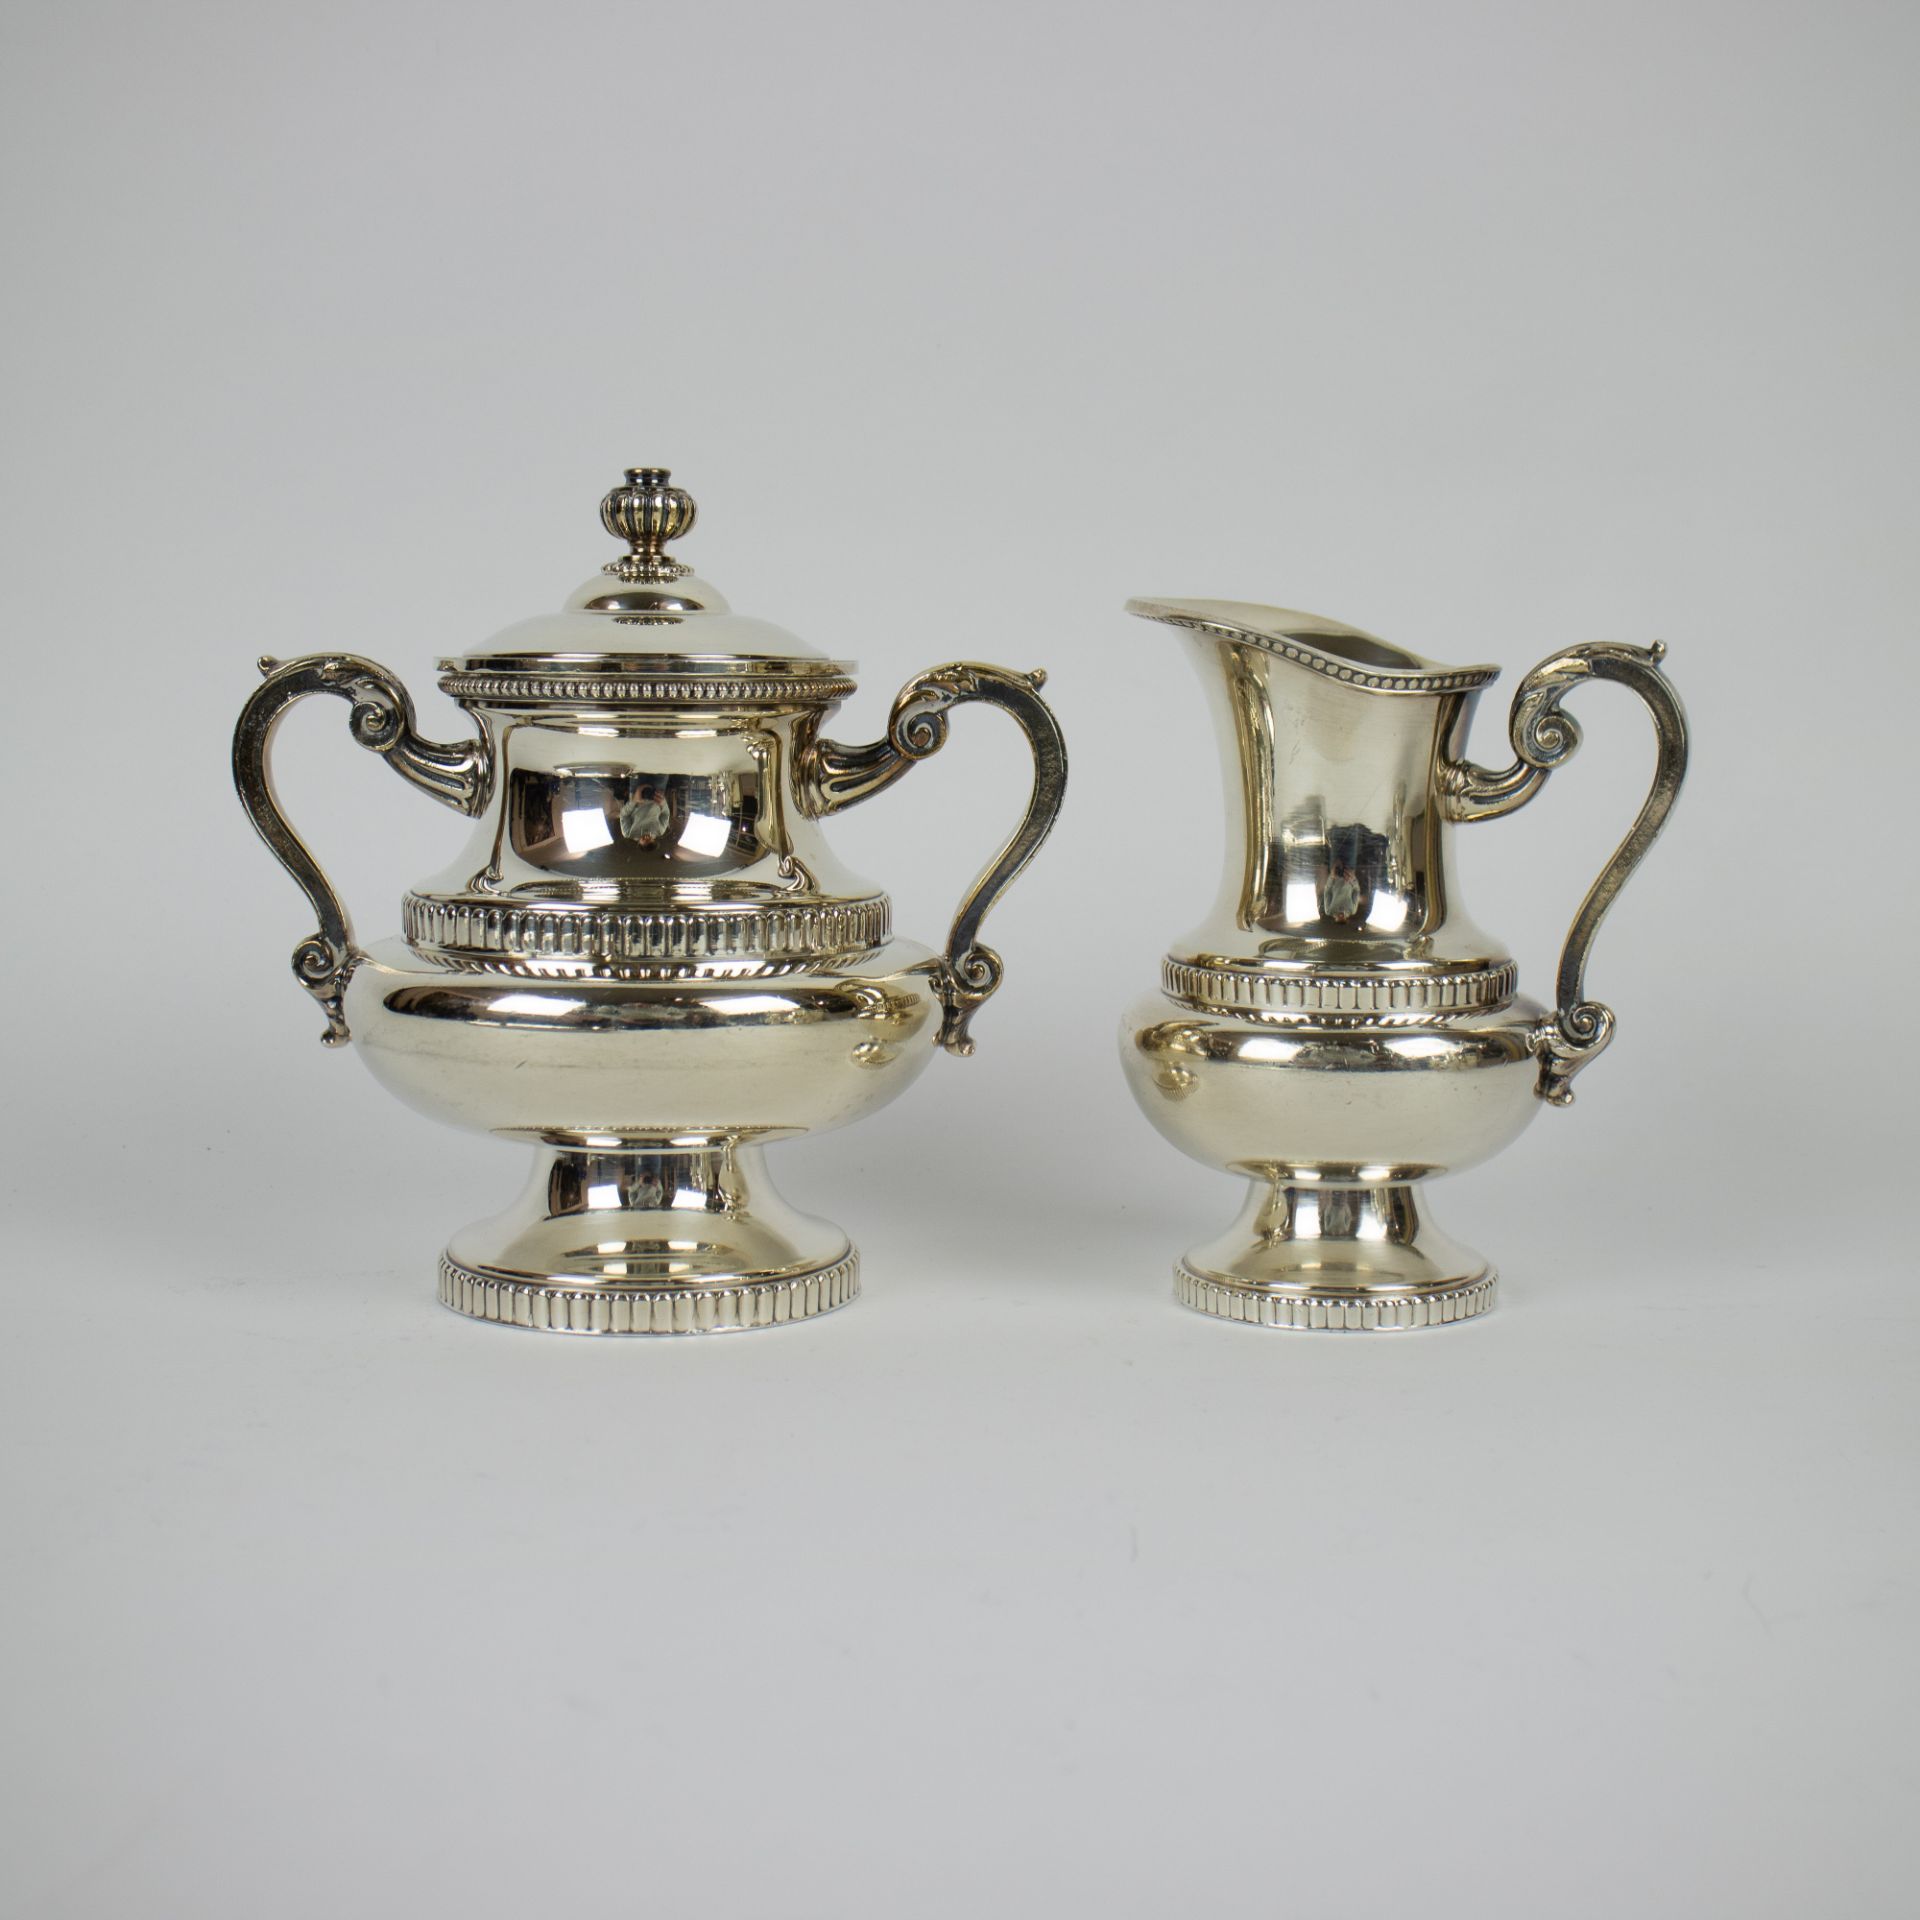 Wiskemann silver plated coffee and tea set and champagne bucket - Image 4 of 4